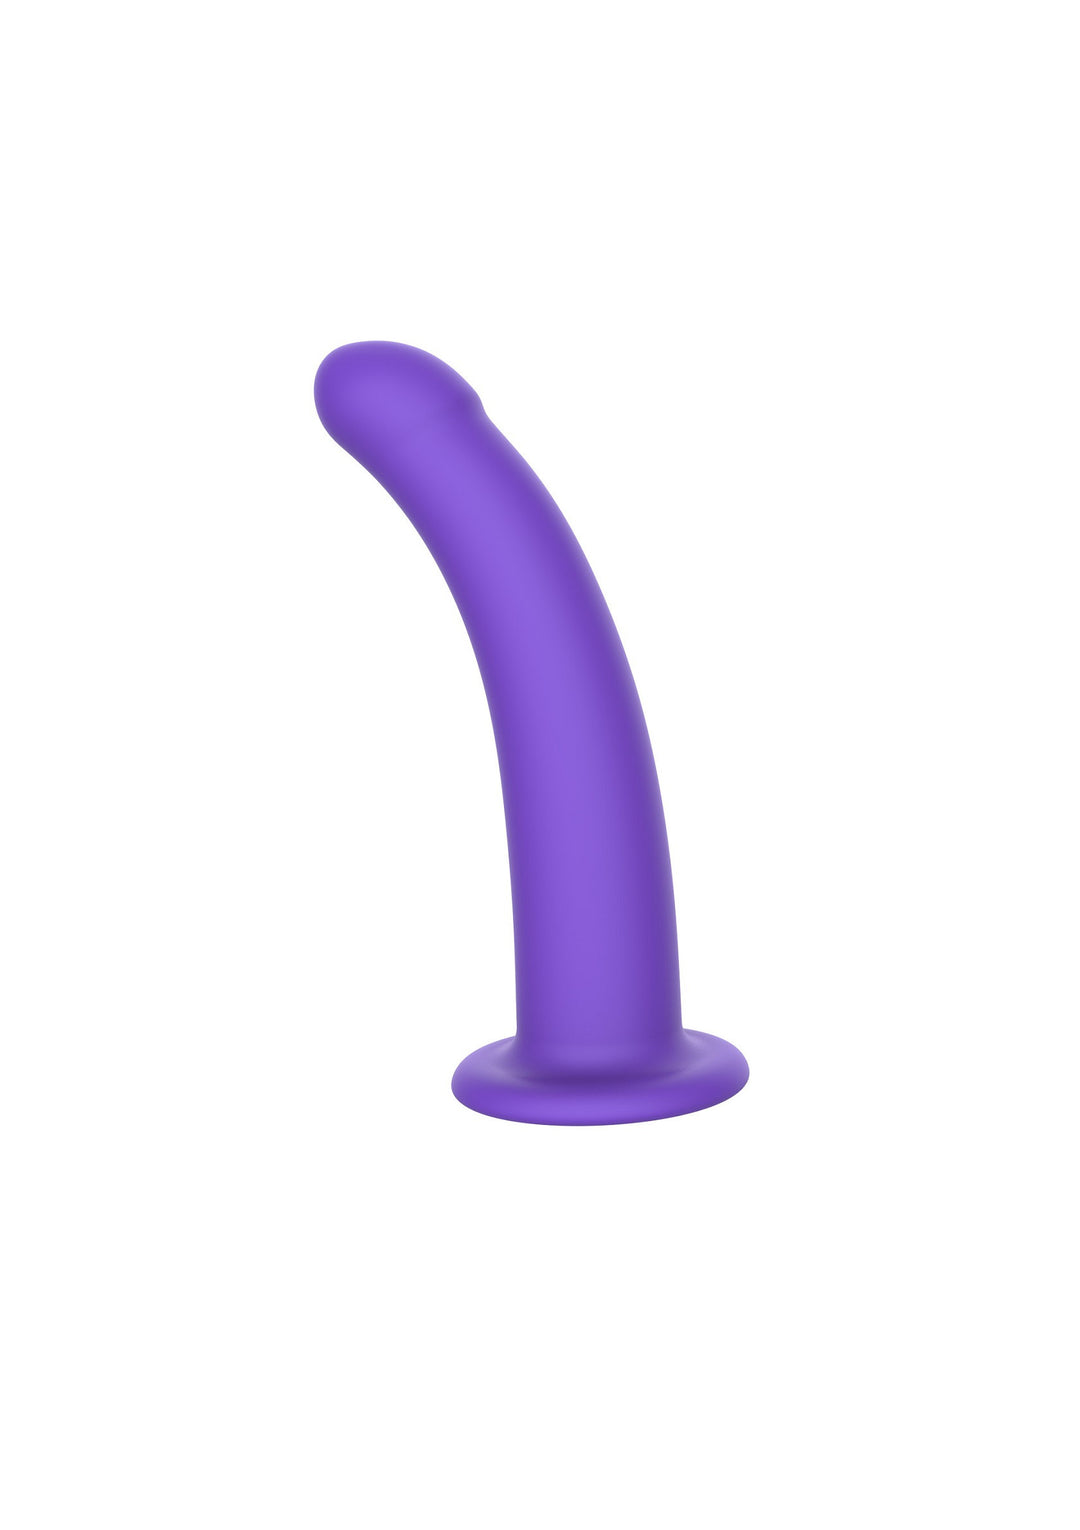 Dildo with suction cup Harness Dong S - 12.5cm